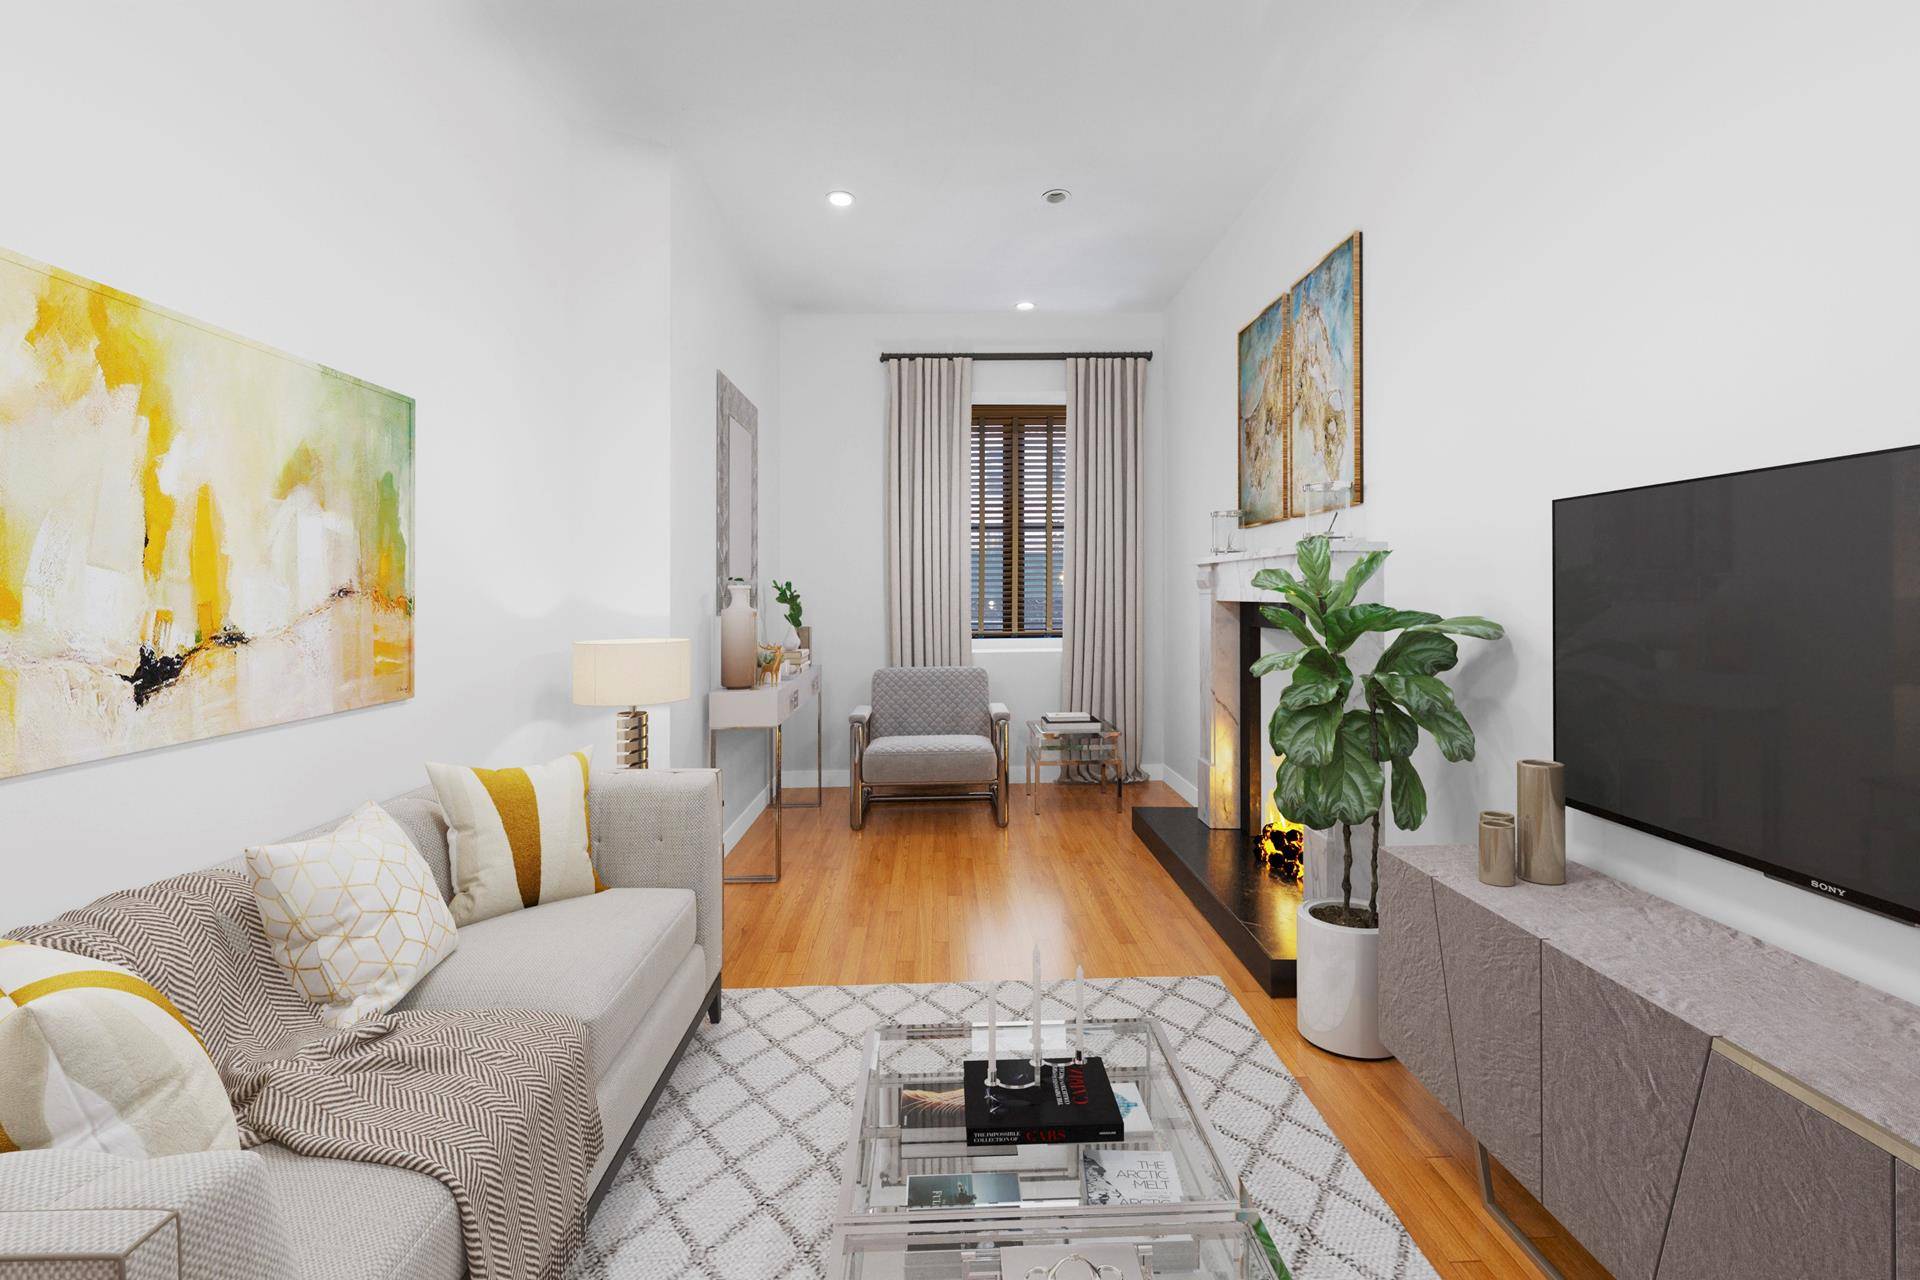 At the gateway to the greatest neighborhood in the universe, the Chelsea gallery district, we invite you to a stunning, custom, duplex two bed, two bath, maisonette.